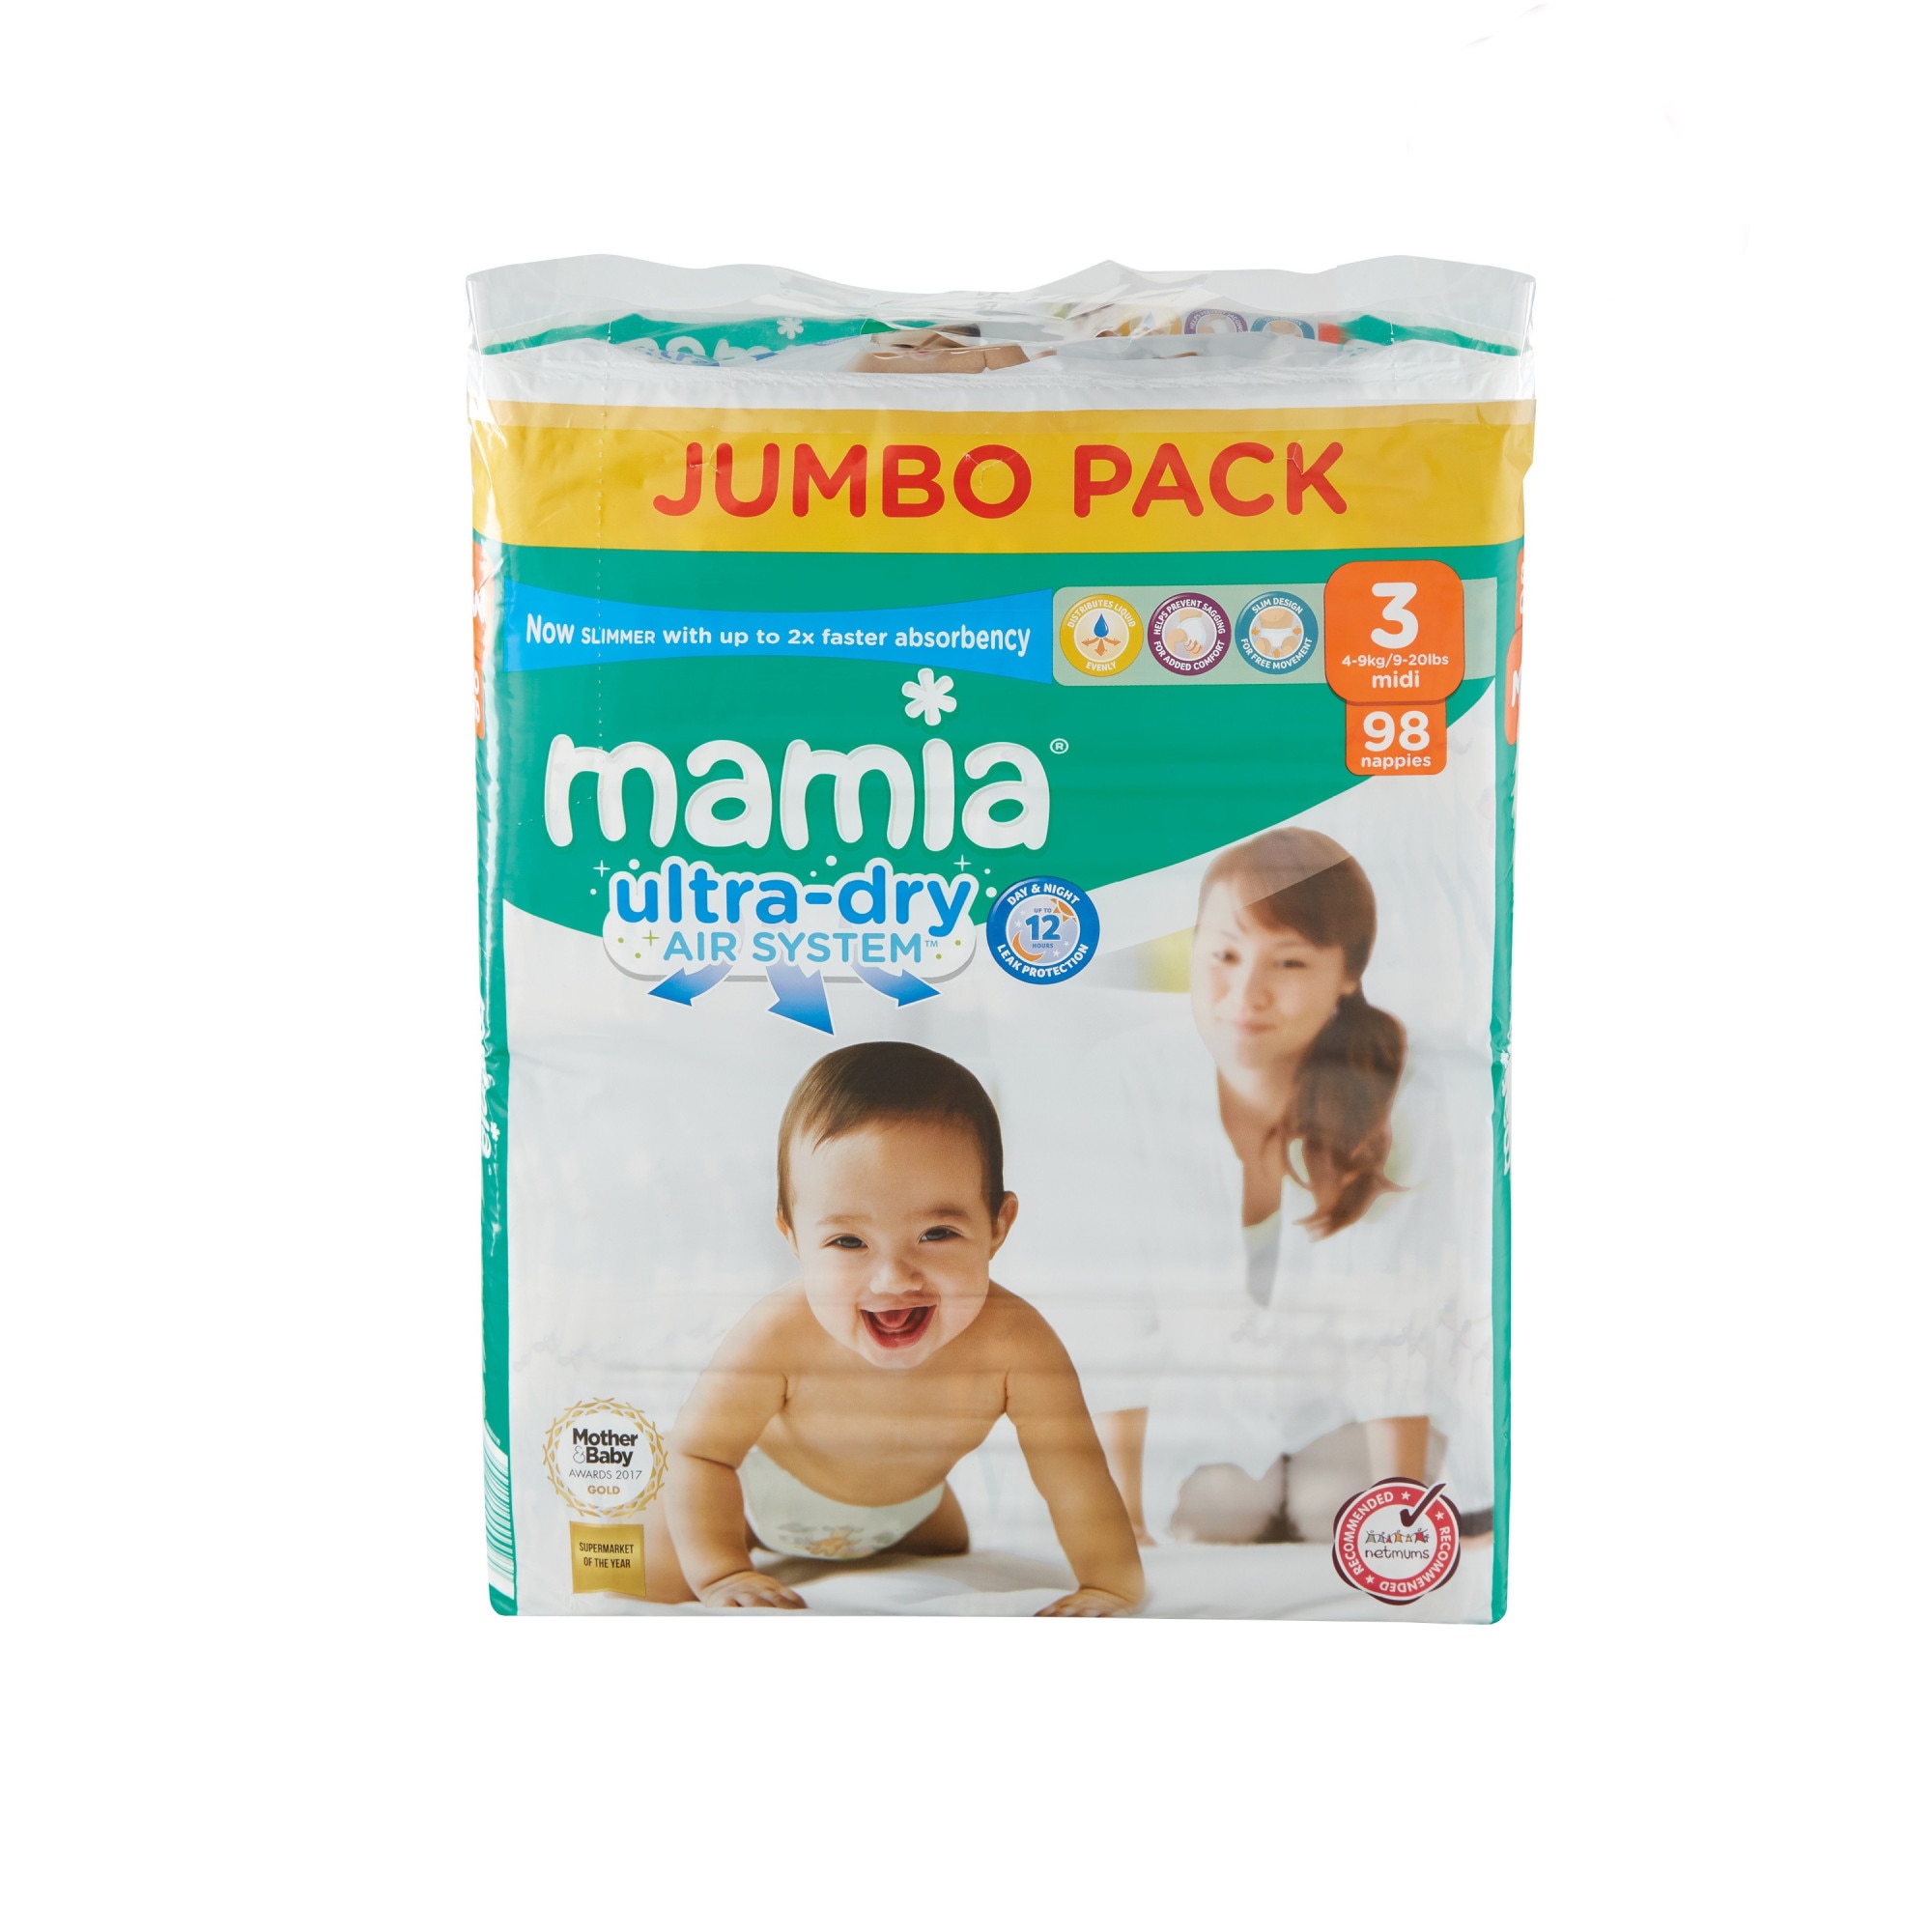 mamia pampers